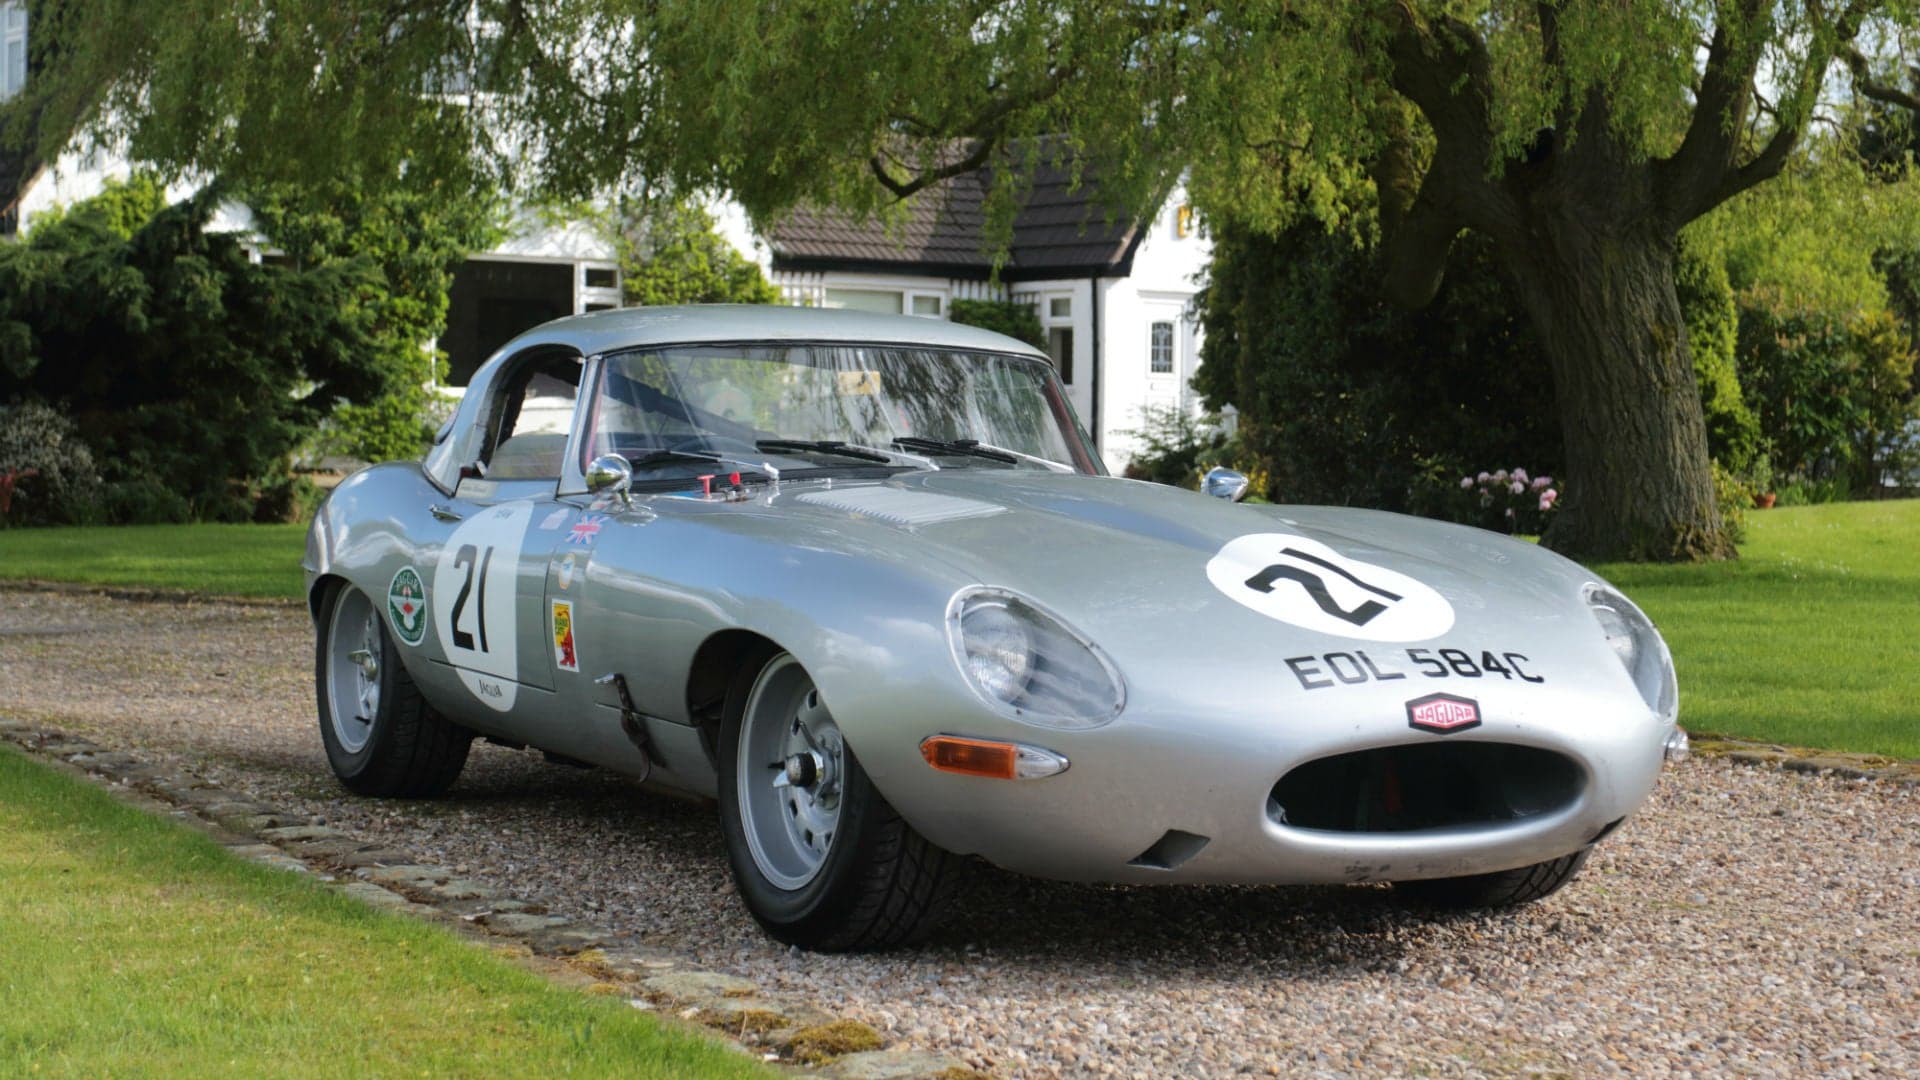 Historic Jaguar E-Type Roadster Raced by Sir Stirling Moss Going to Auction